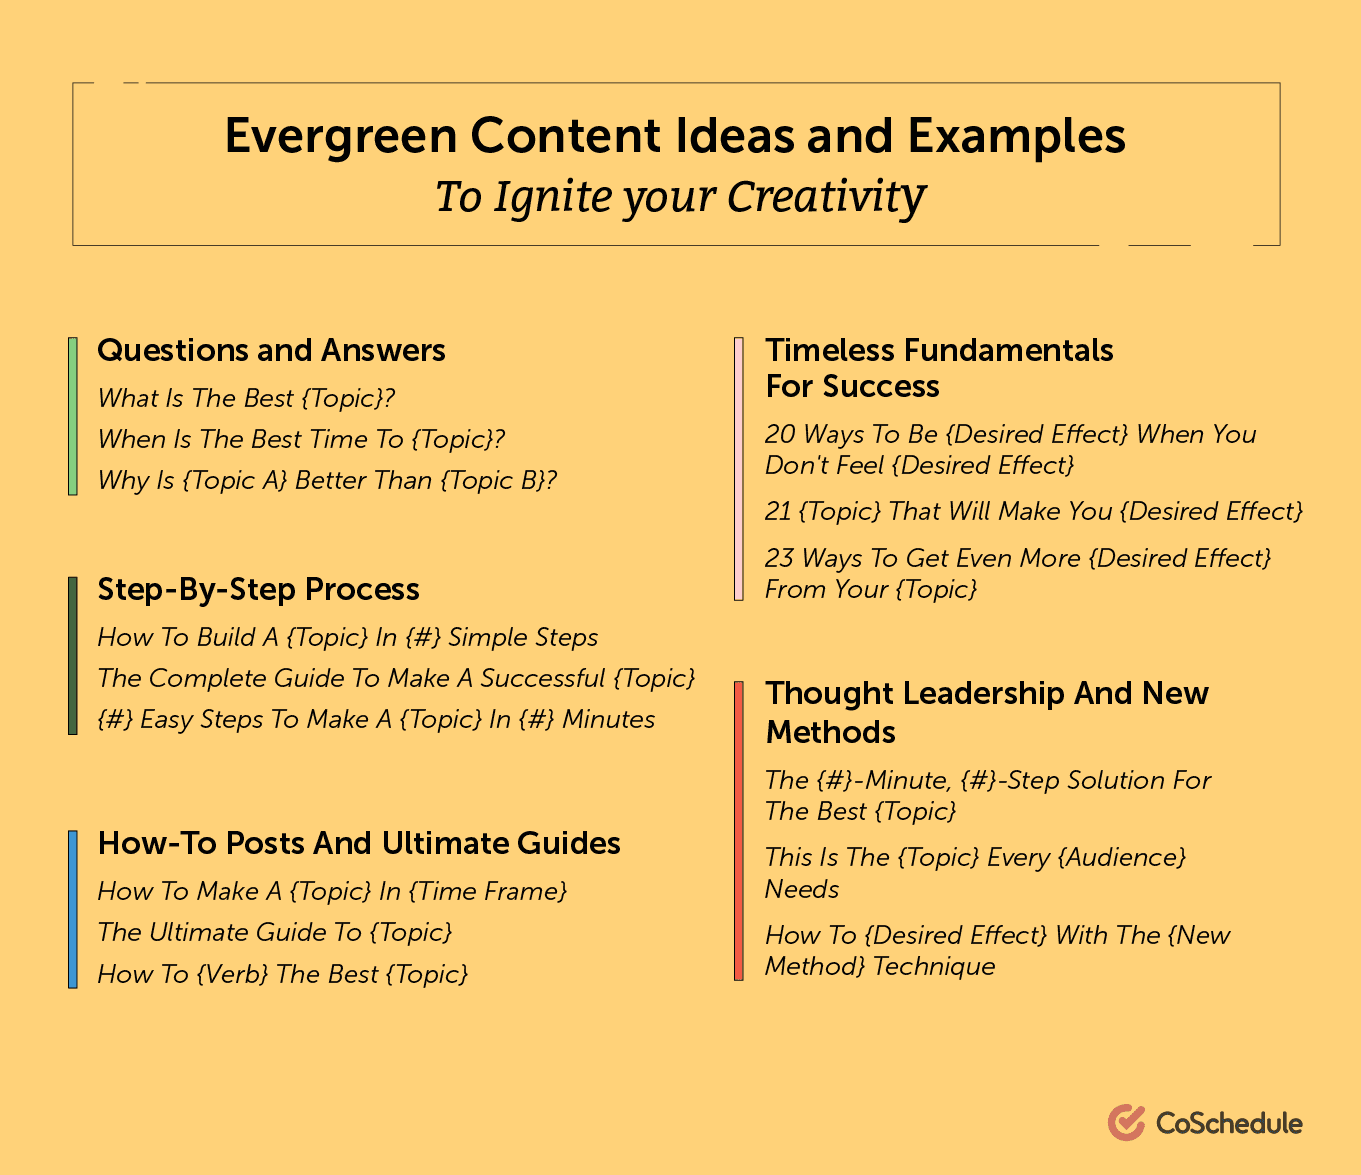 Evergreen content ideas and examples